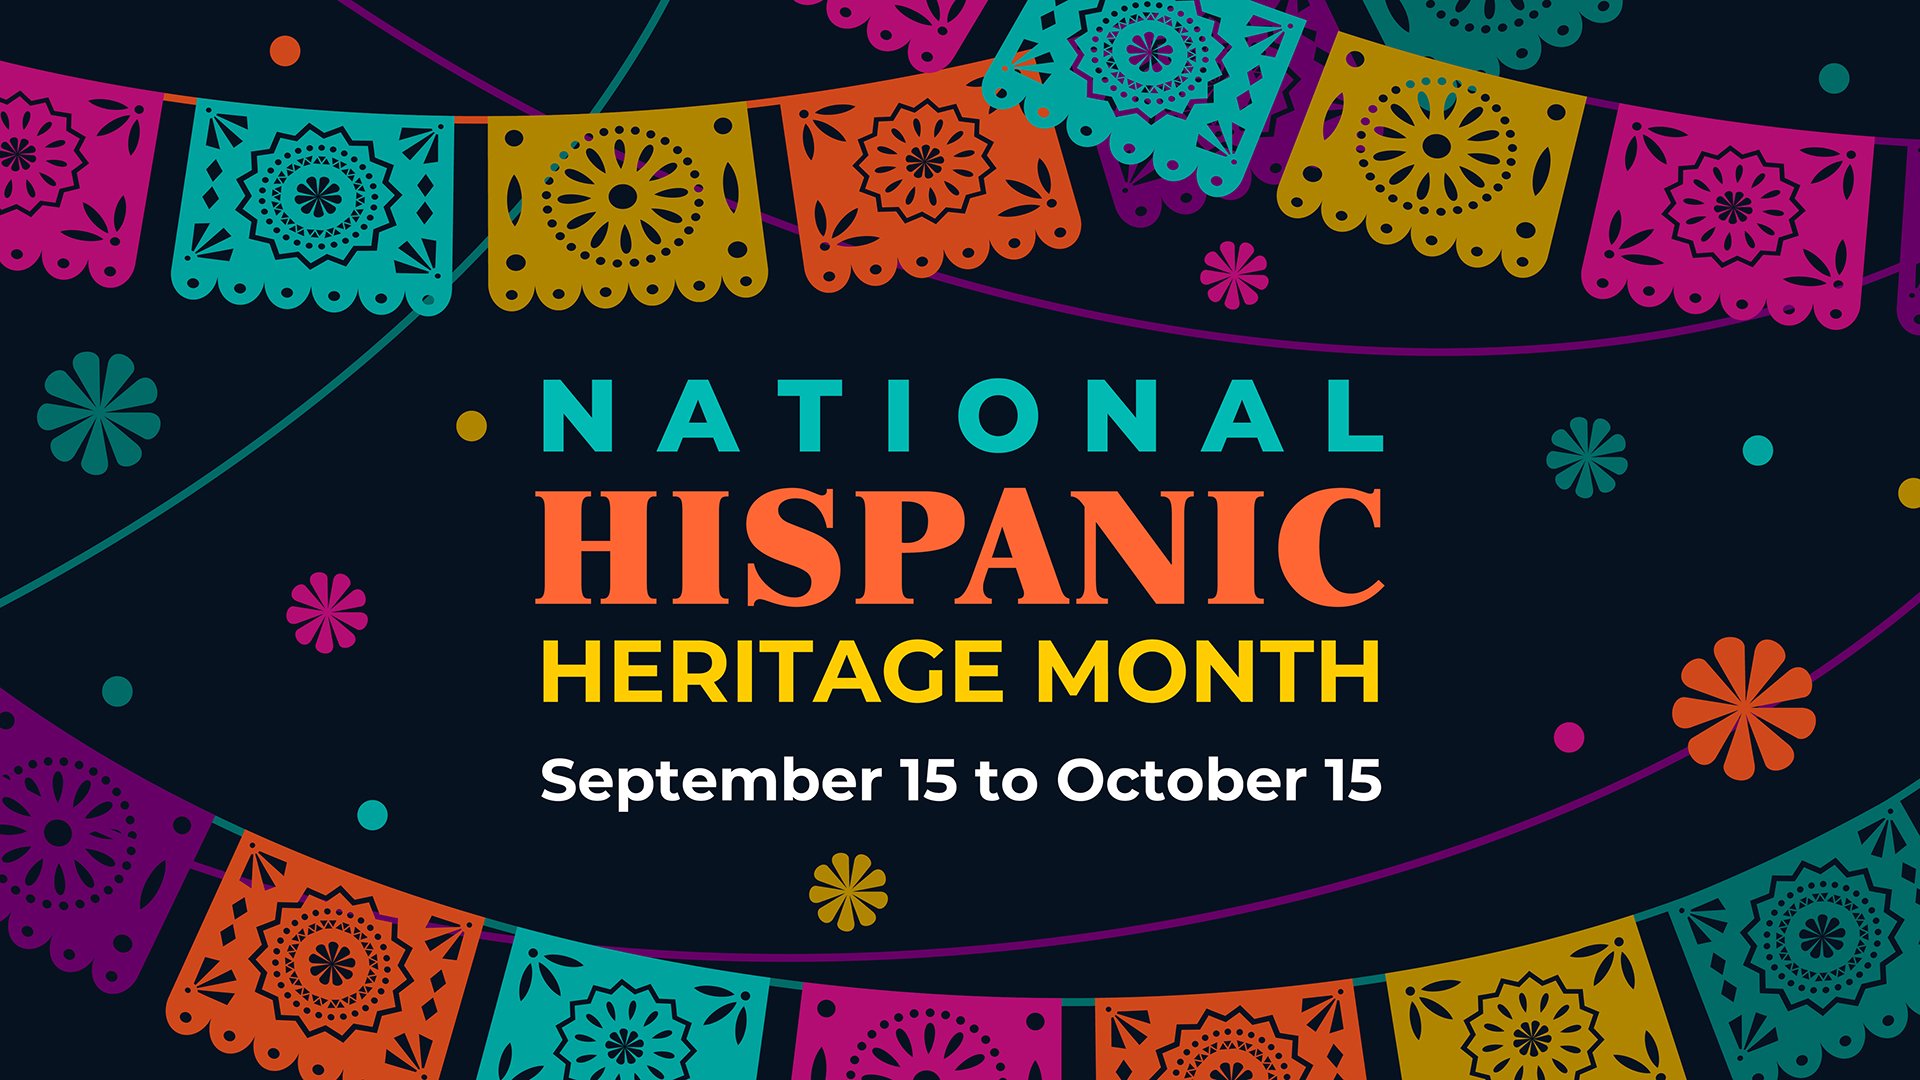 Featured image for “Celebrate National Hispanic Heritage Month ”